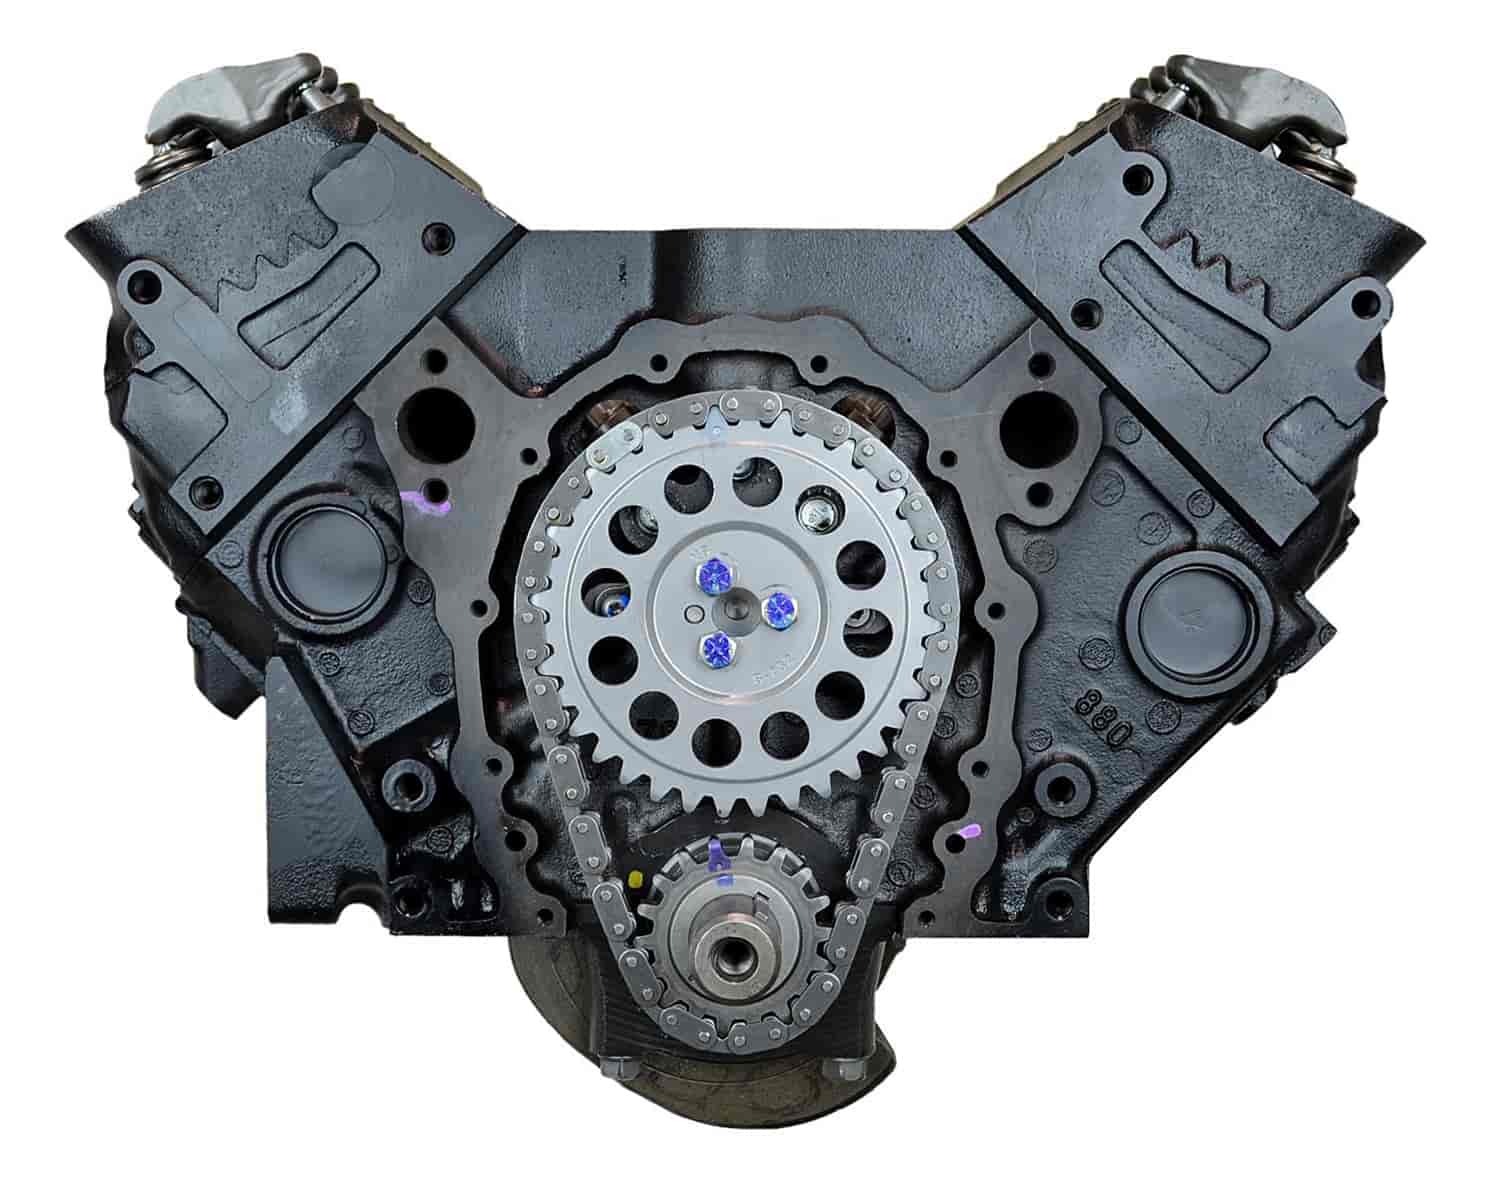 Remanufactured Crate Engine for 1996-2000 Chevy & GMC C/K Truck & Van with 350ci/5.7L V8